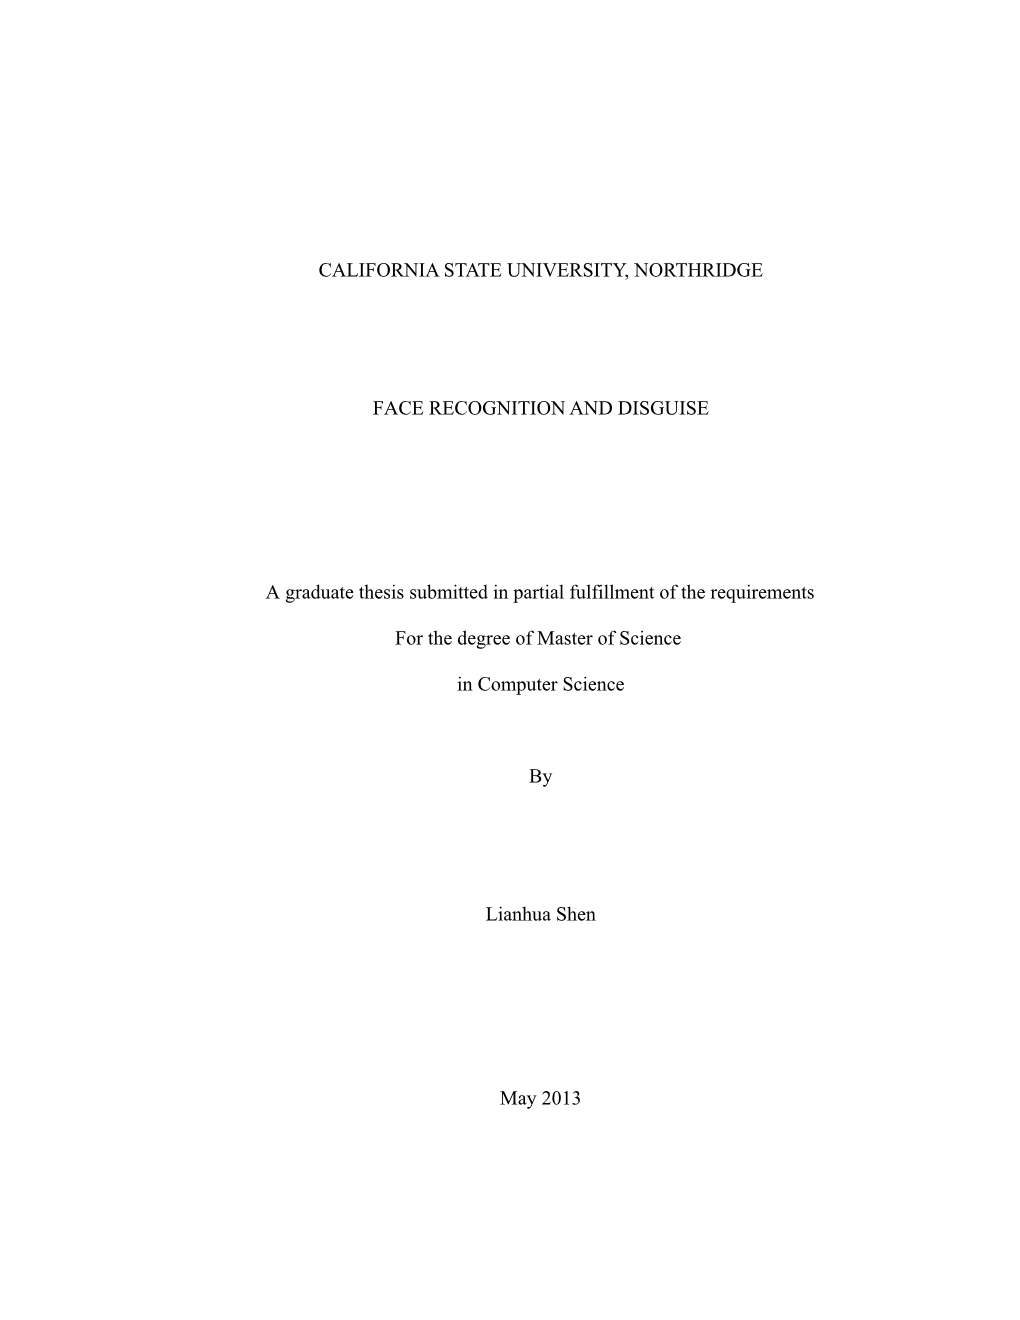 CALIFORNIA STATE UNIVERSITY, NORTHRIDGE FACE RECOGNITION and DISGUISE a Graduate Thesis Submitted in Partial Fulfillment Of